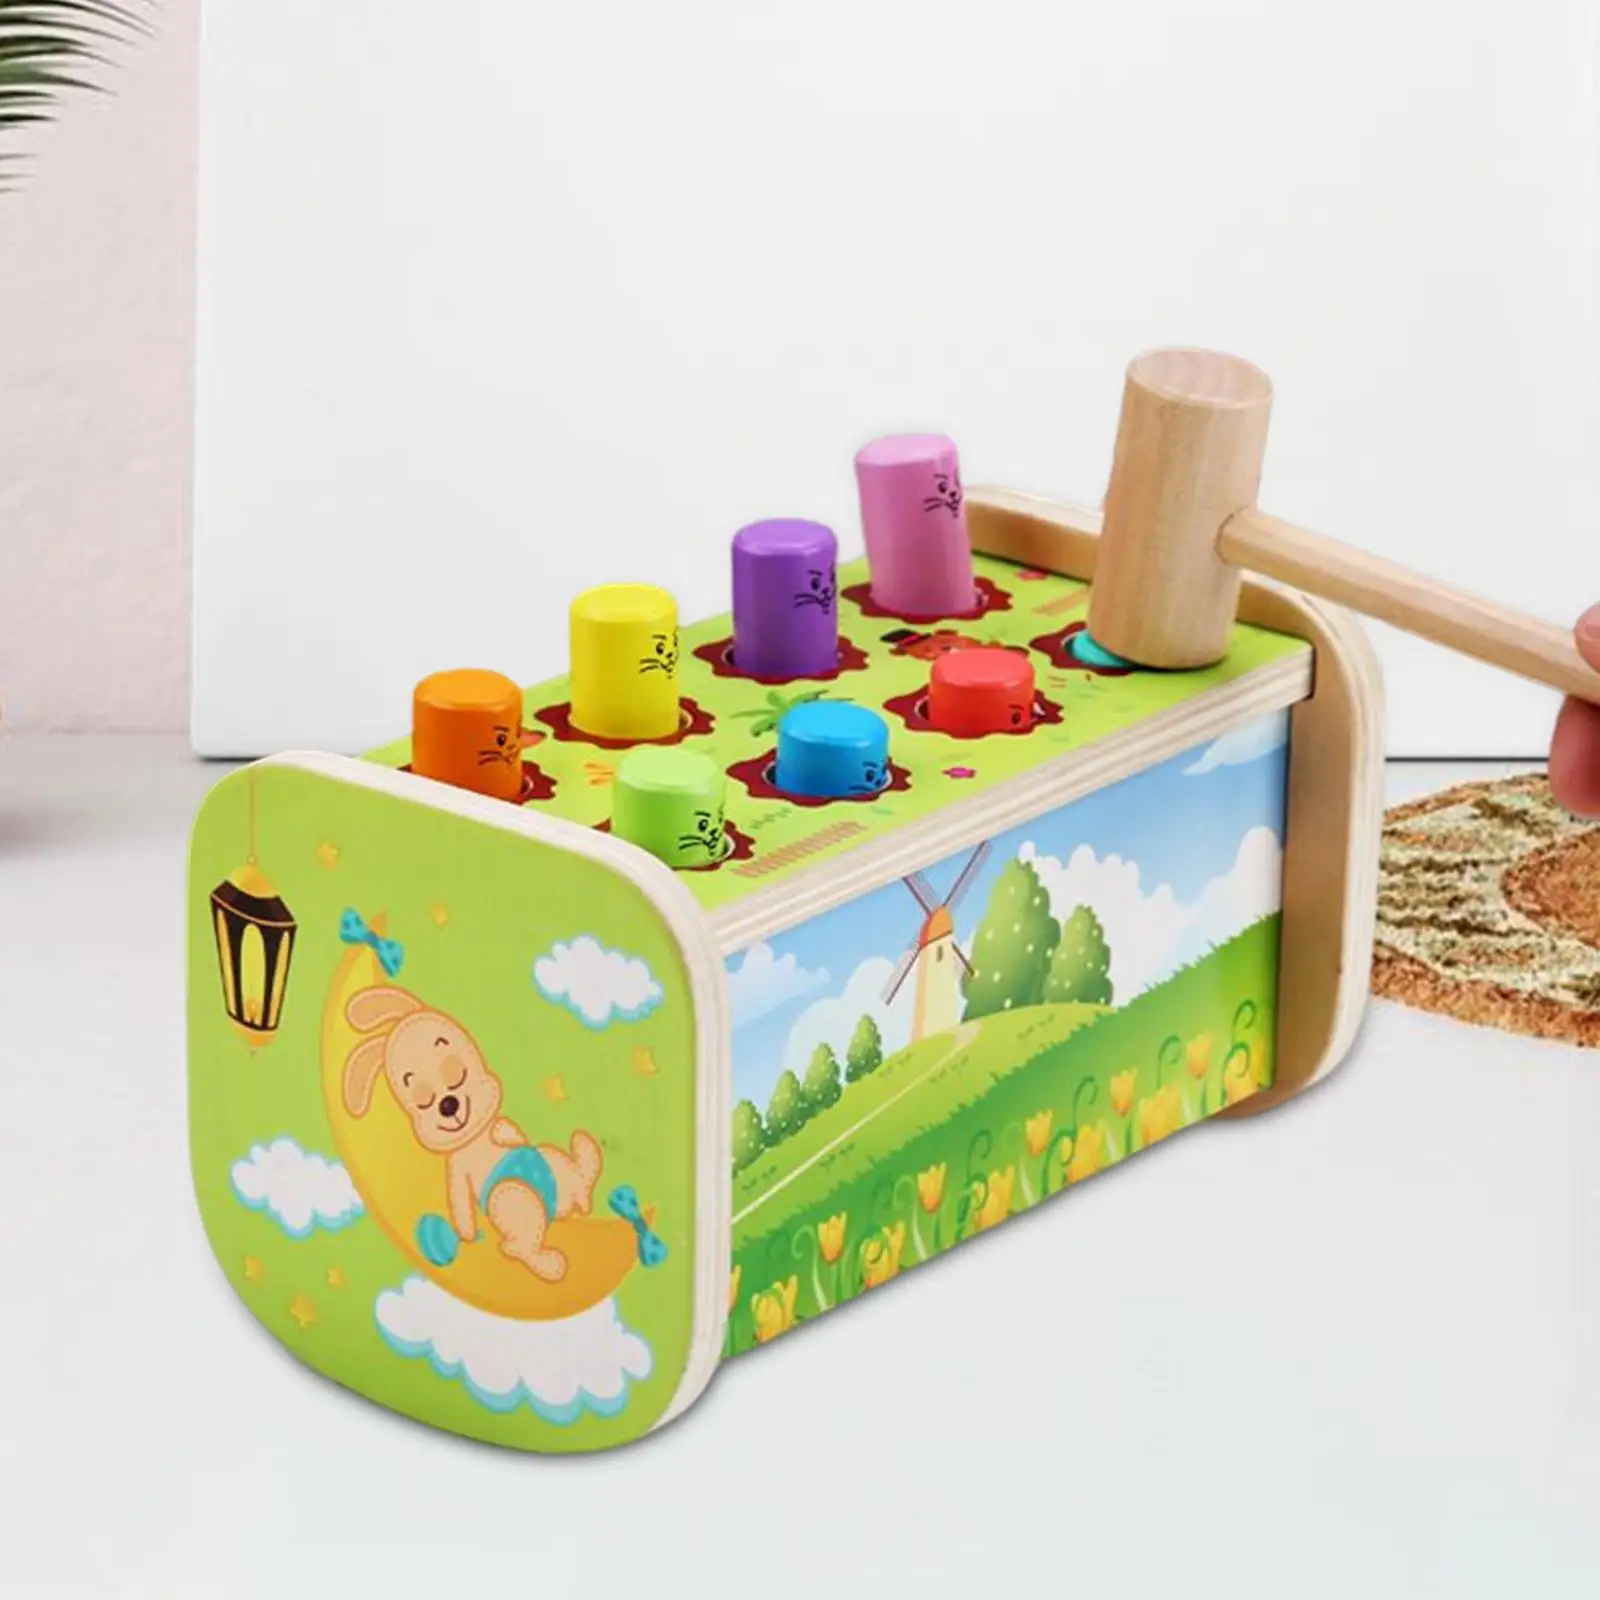 Pounding Bench with Pegs and Mallet Color Recognition Fine Motor for Birthday Gifts